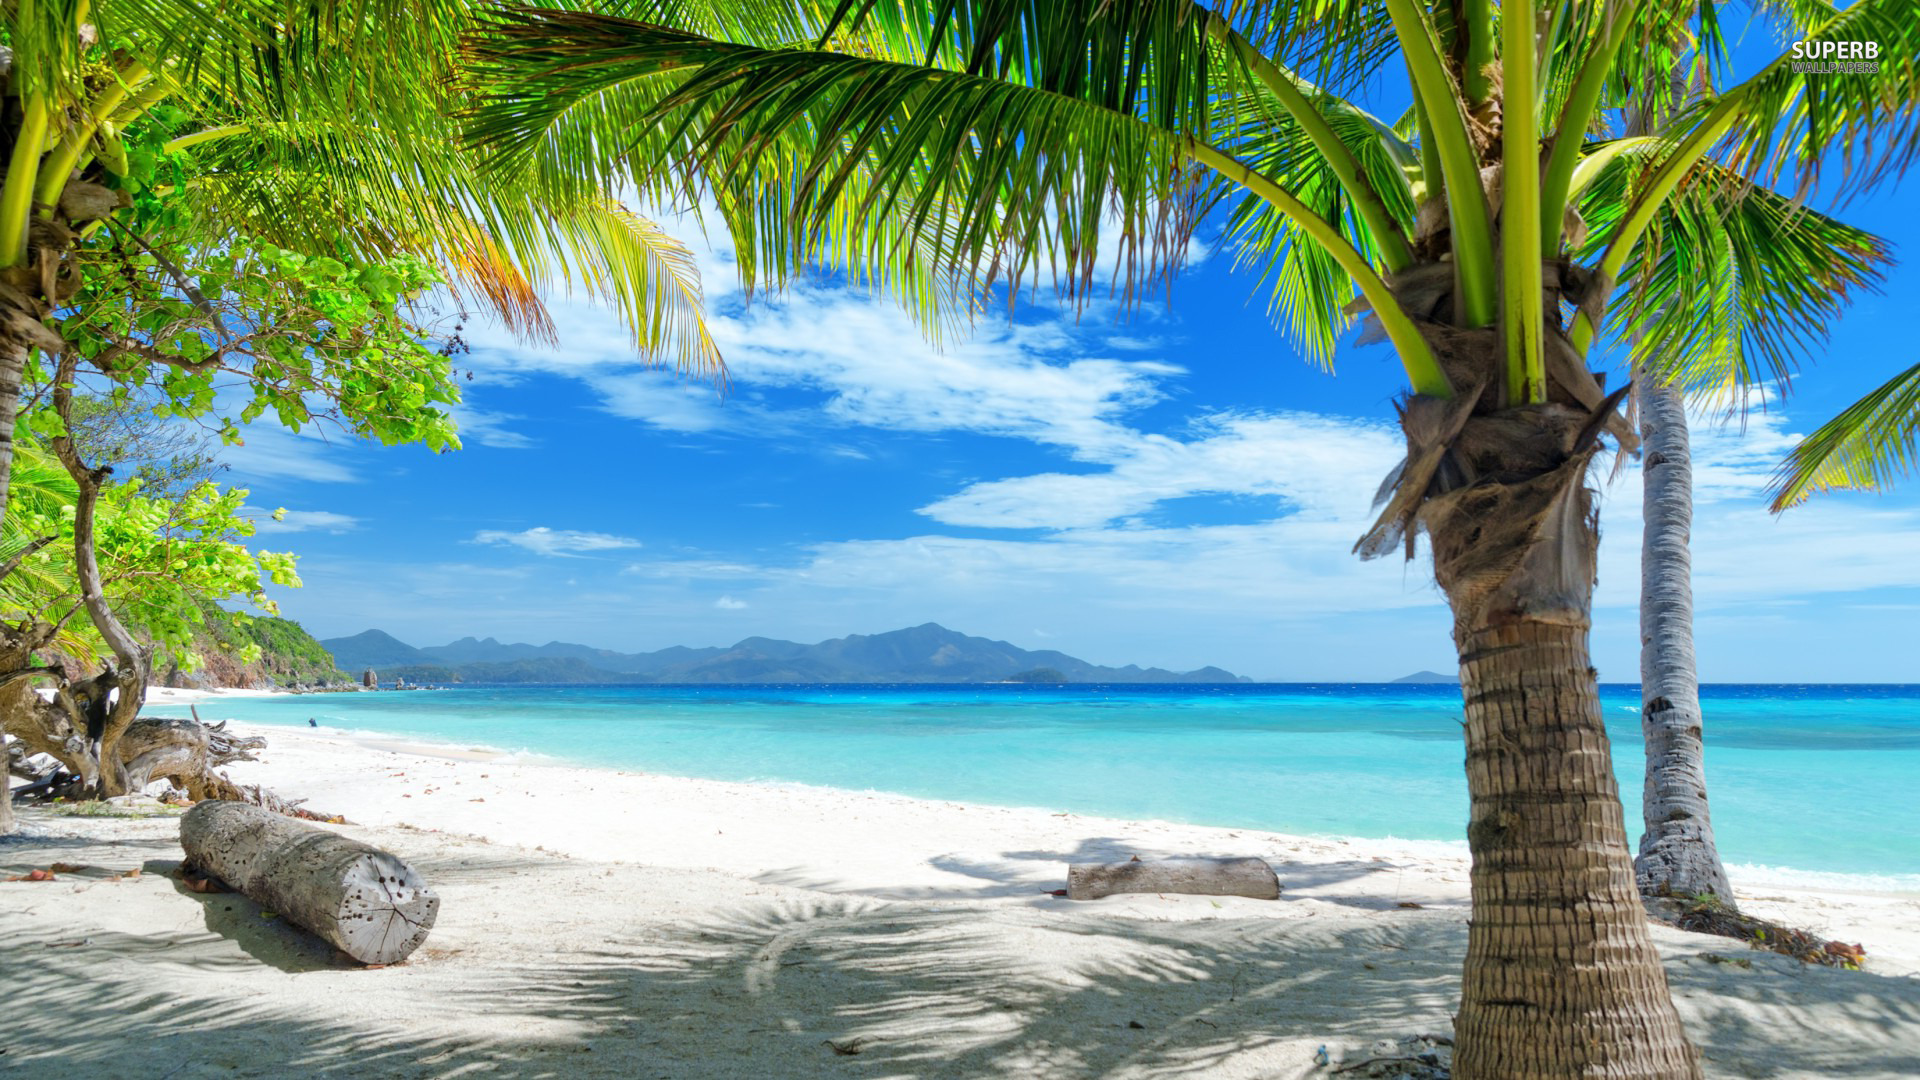 tropical beach hd wallpapers Desktop Backgrounds for Free HD